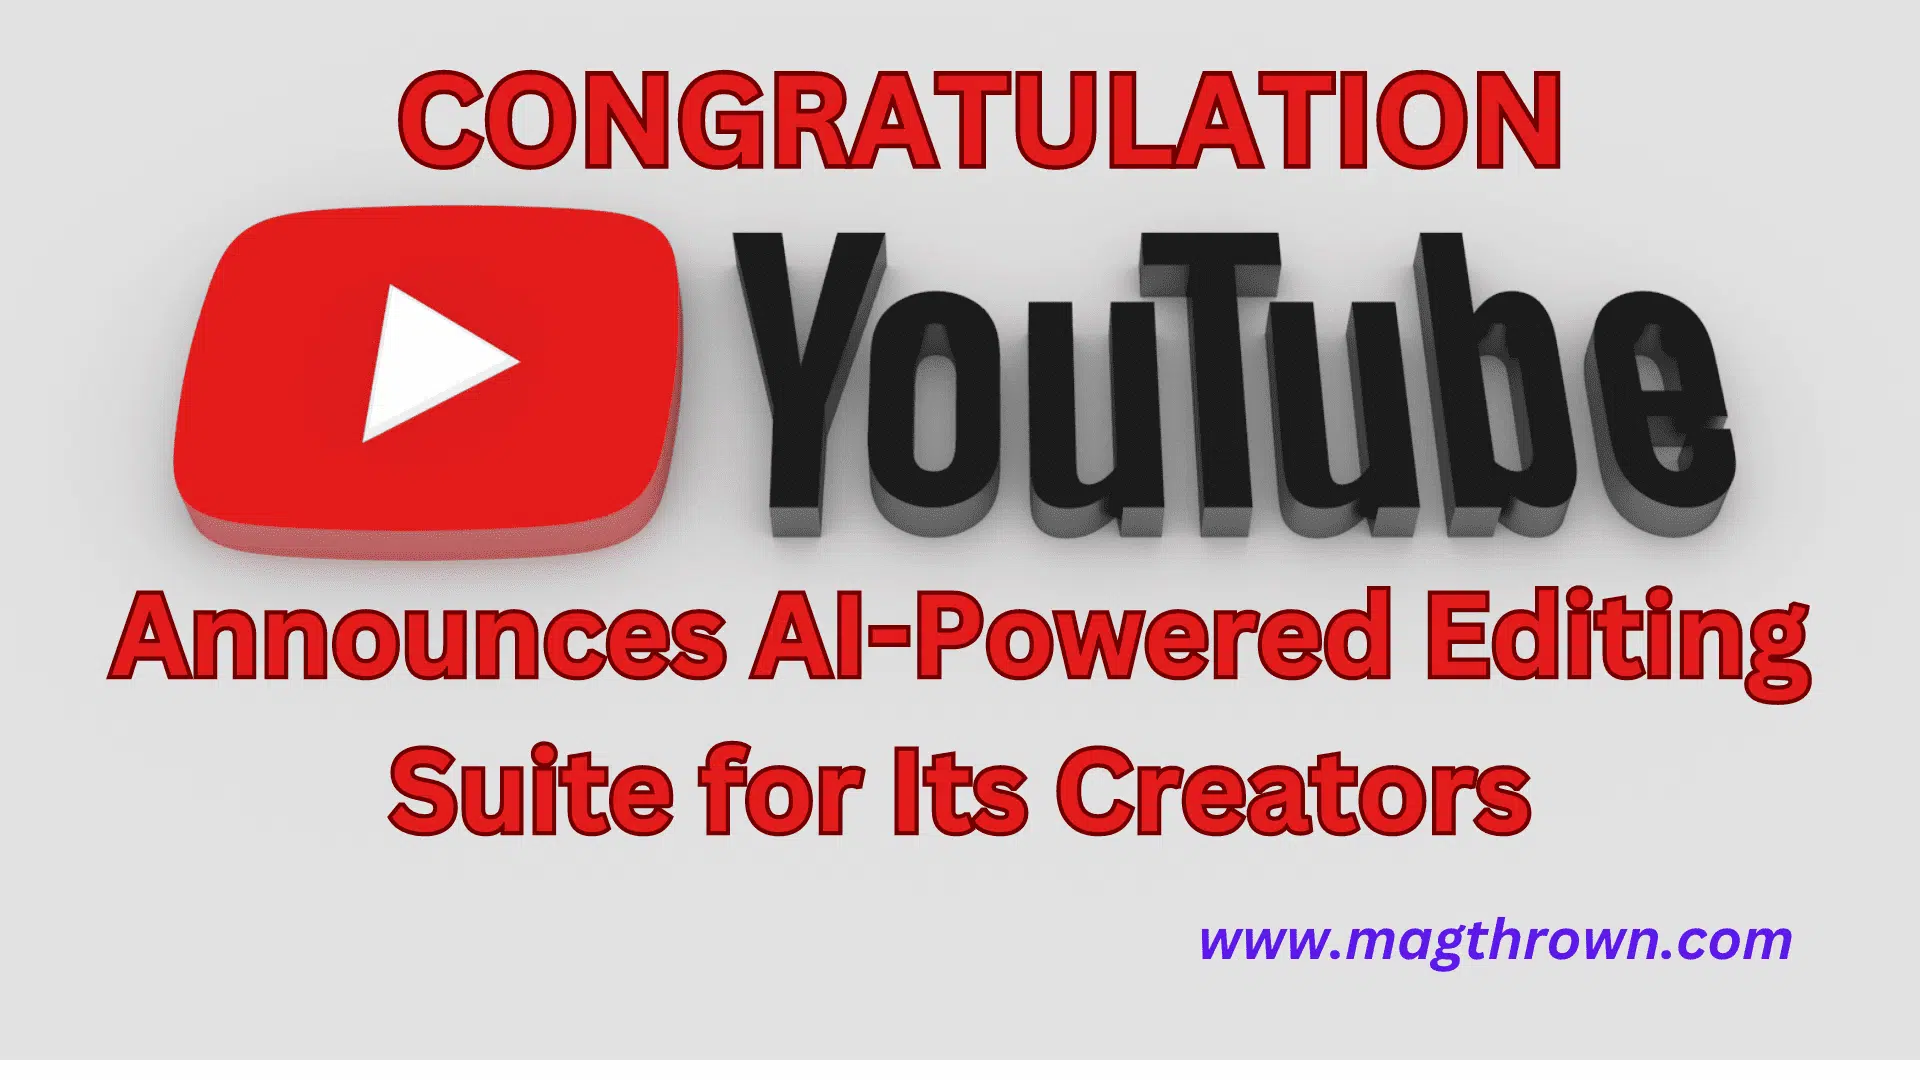 YouTube Announces AI-Powered Editing Suite for Its Creators